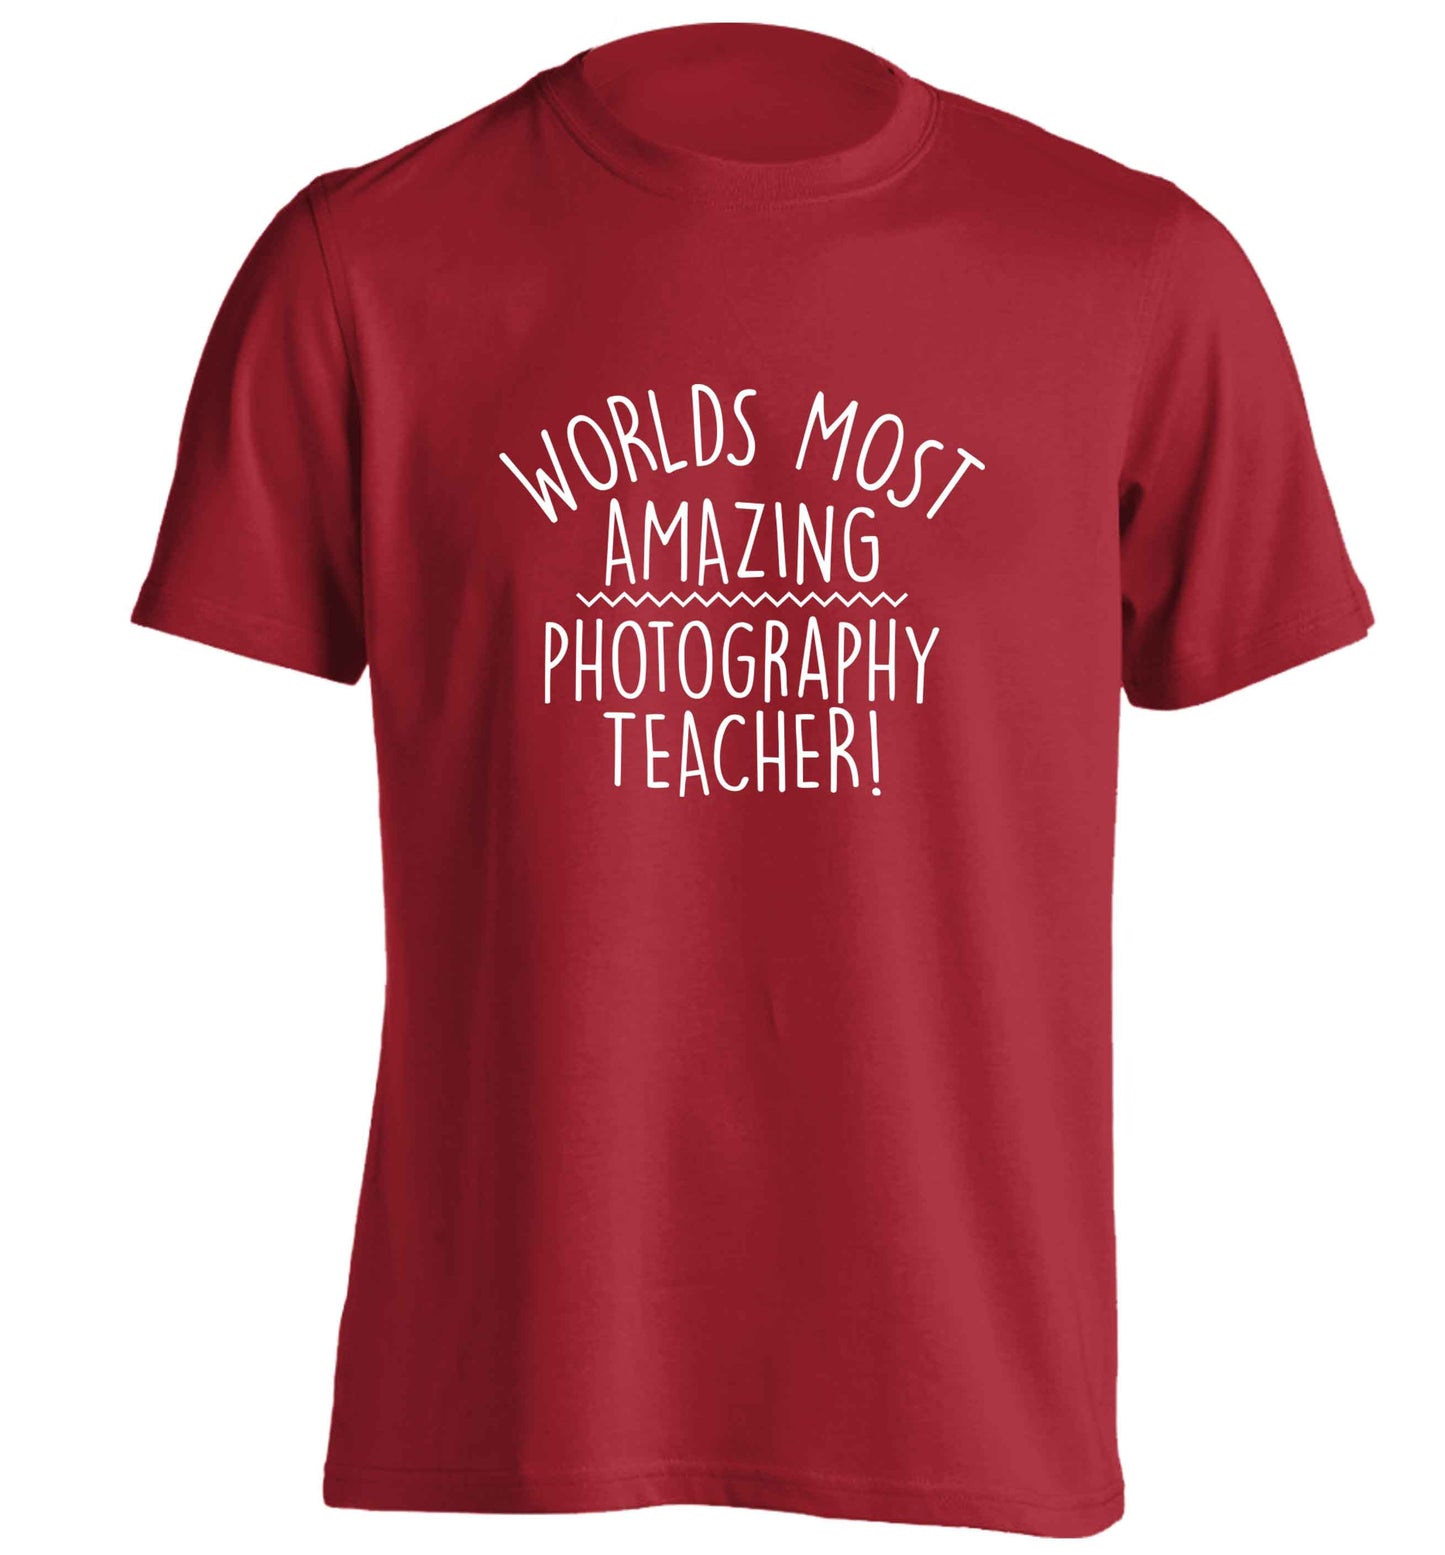 Worlds most amazing photography teacher adults unisex red Tshirt 2XL